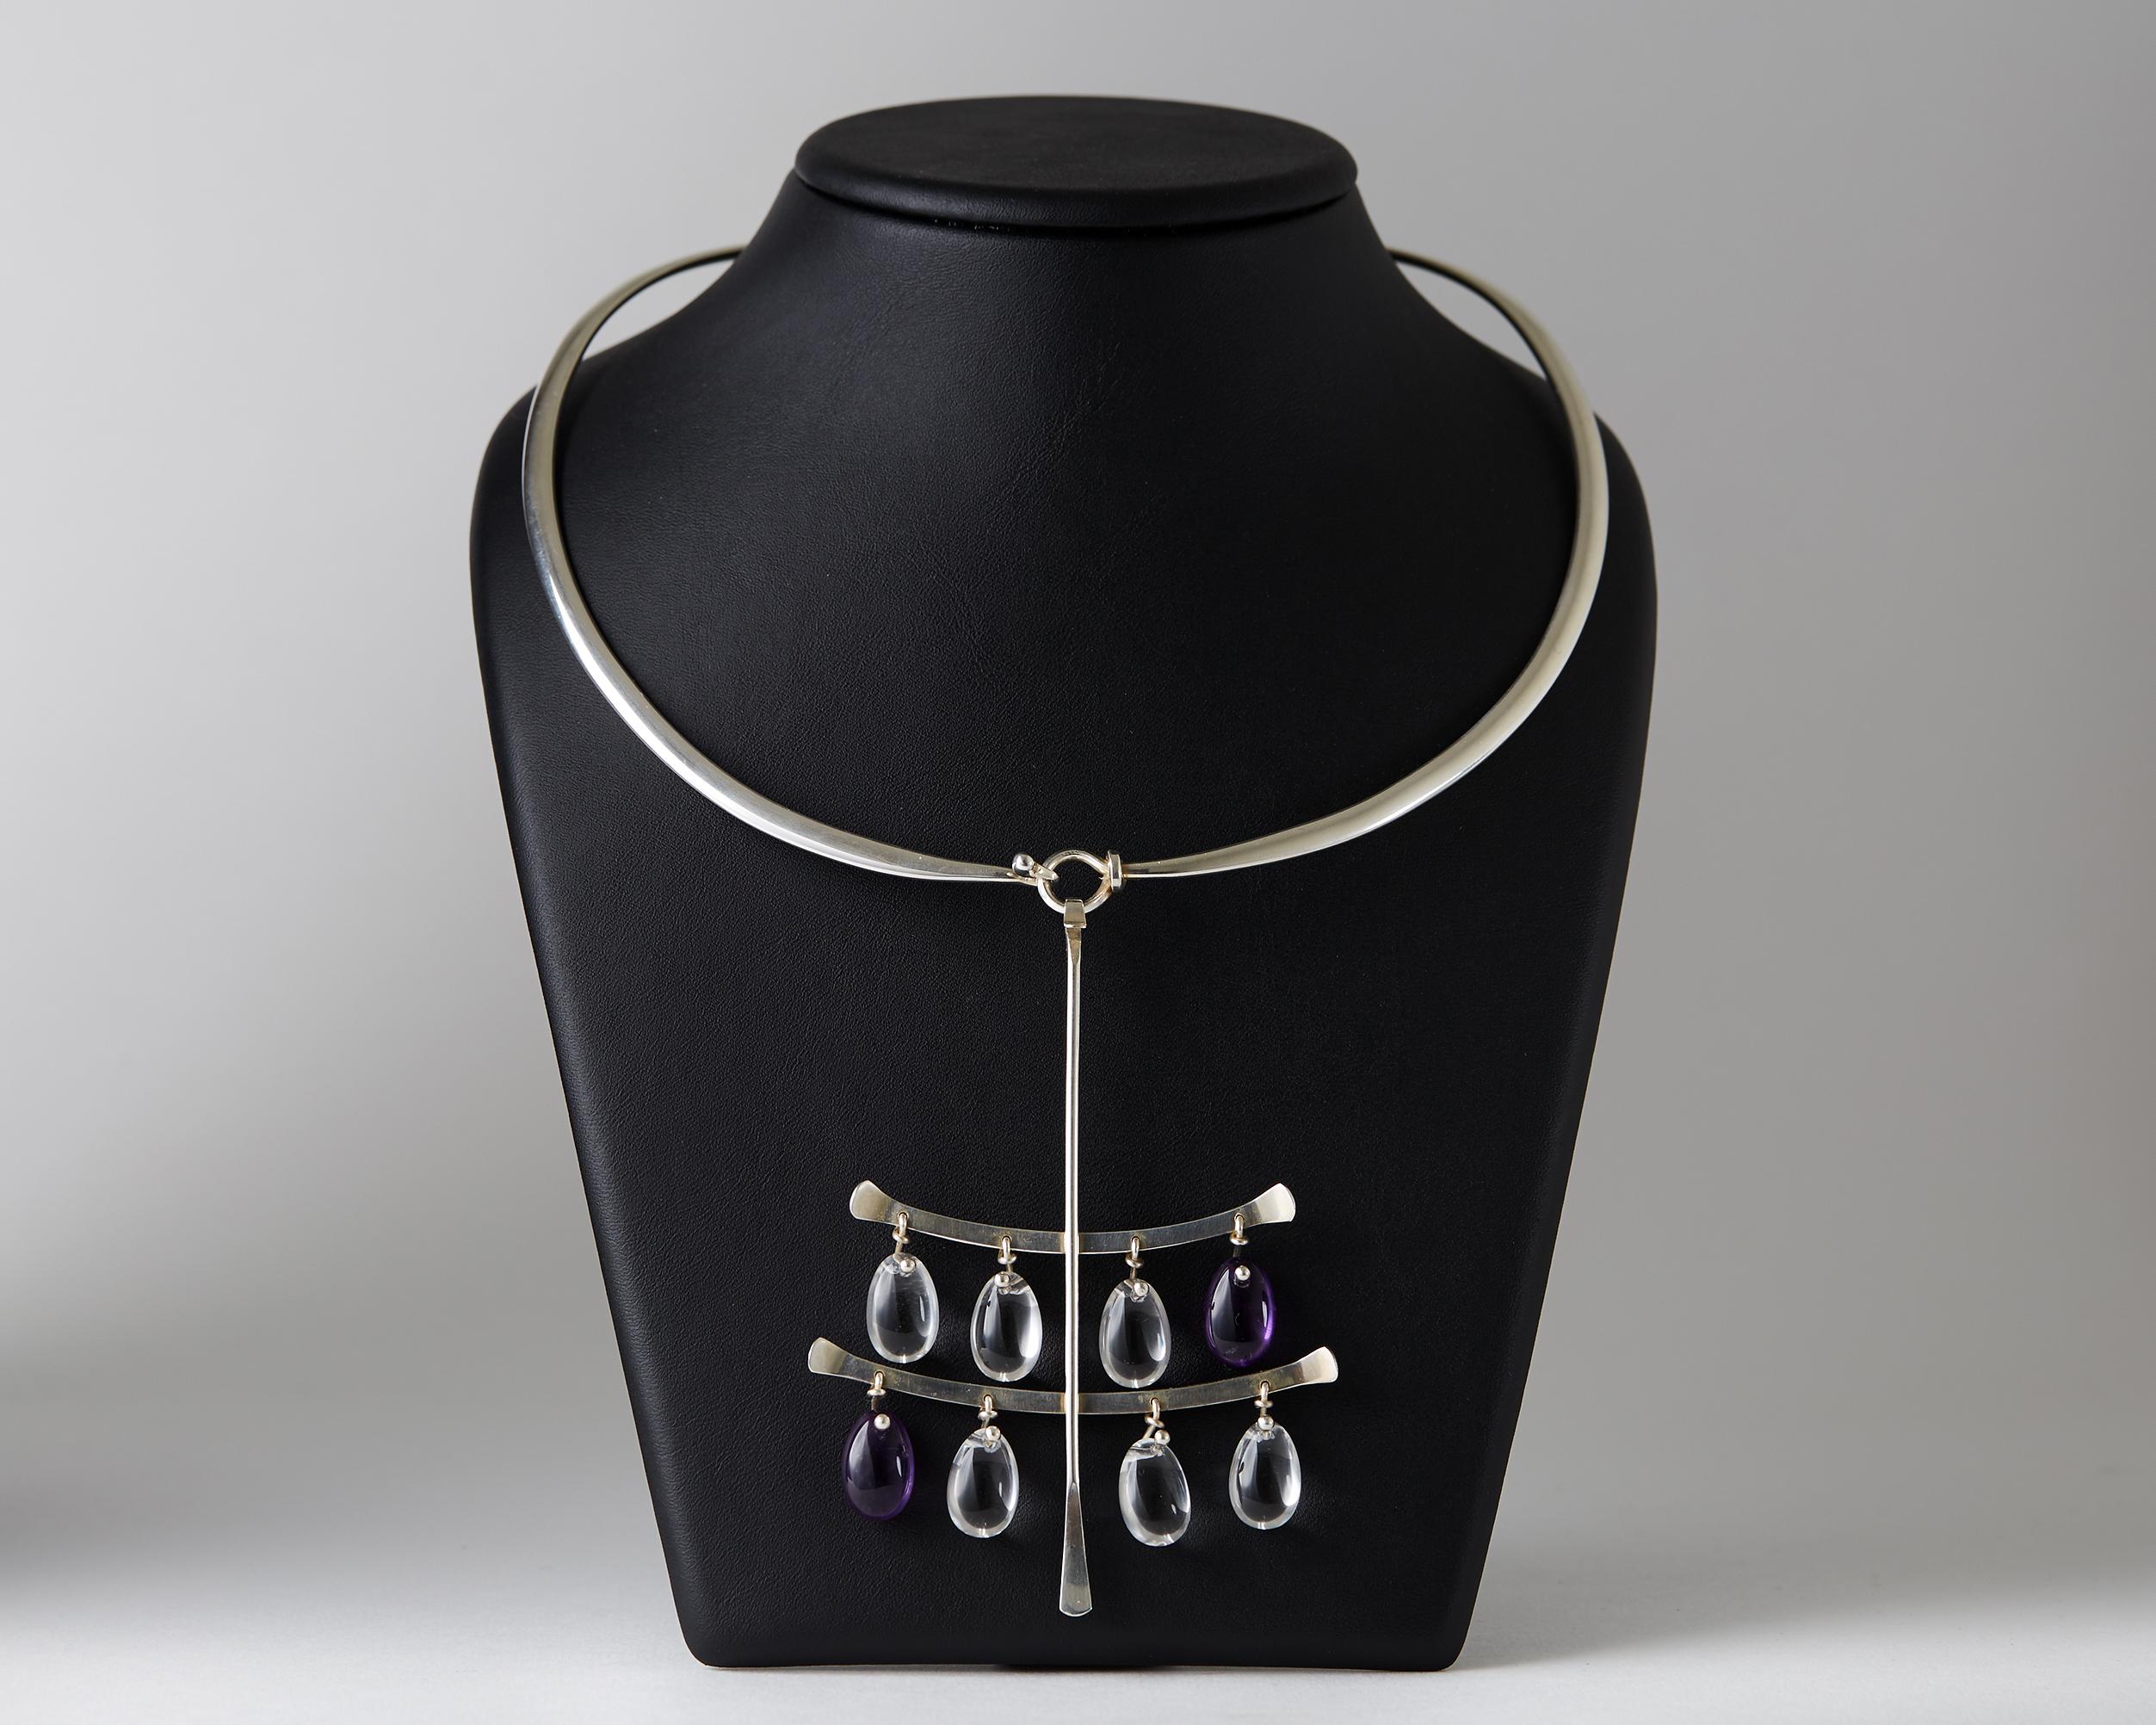 Rock crystal, amethysts, and sterling silver.
